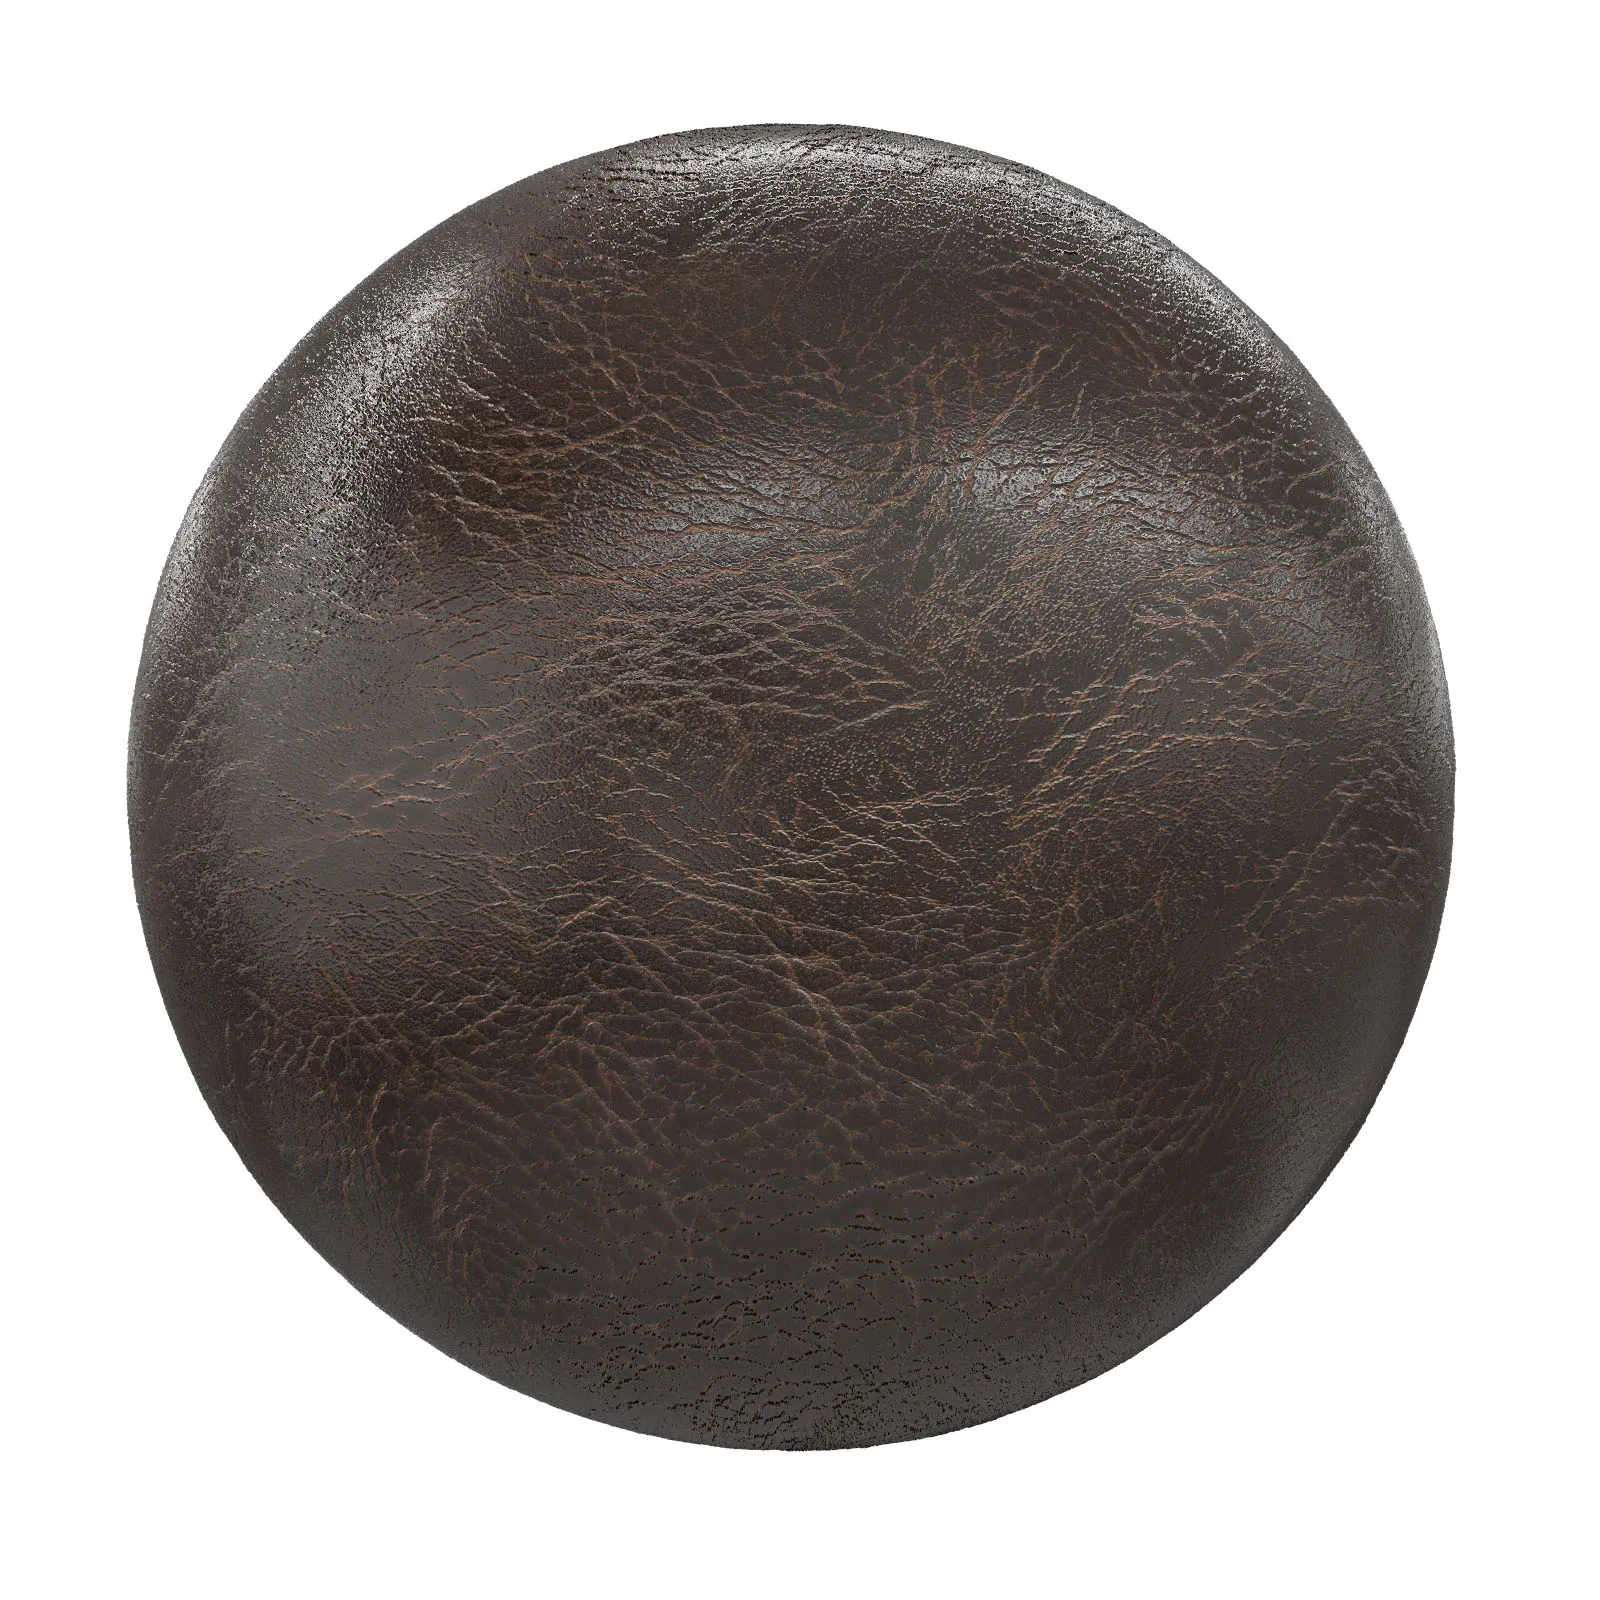 PBR CGAXIS TEXTURES – LEATHER – Brown Leather 5